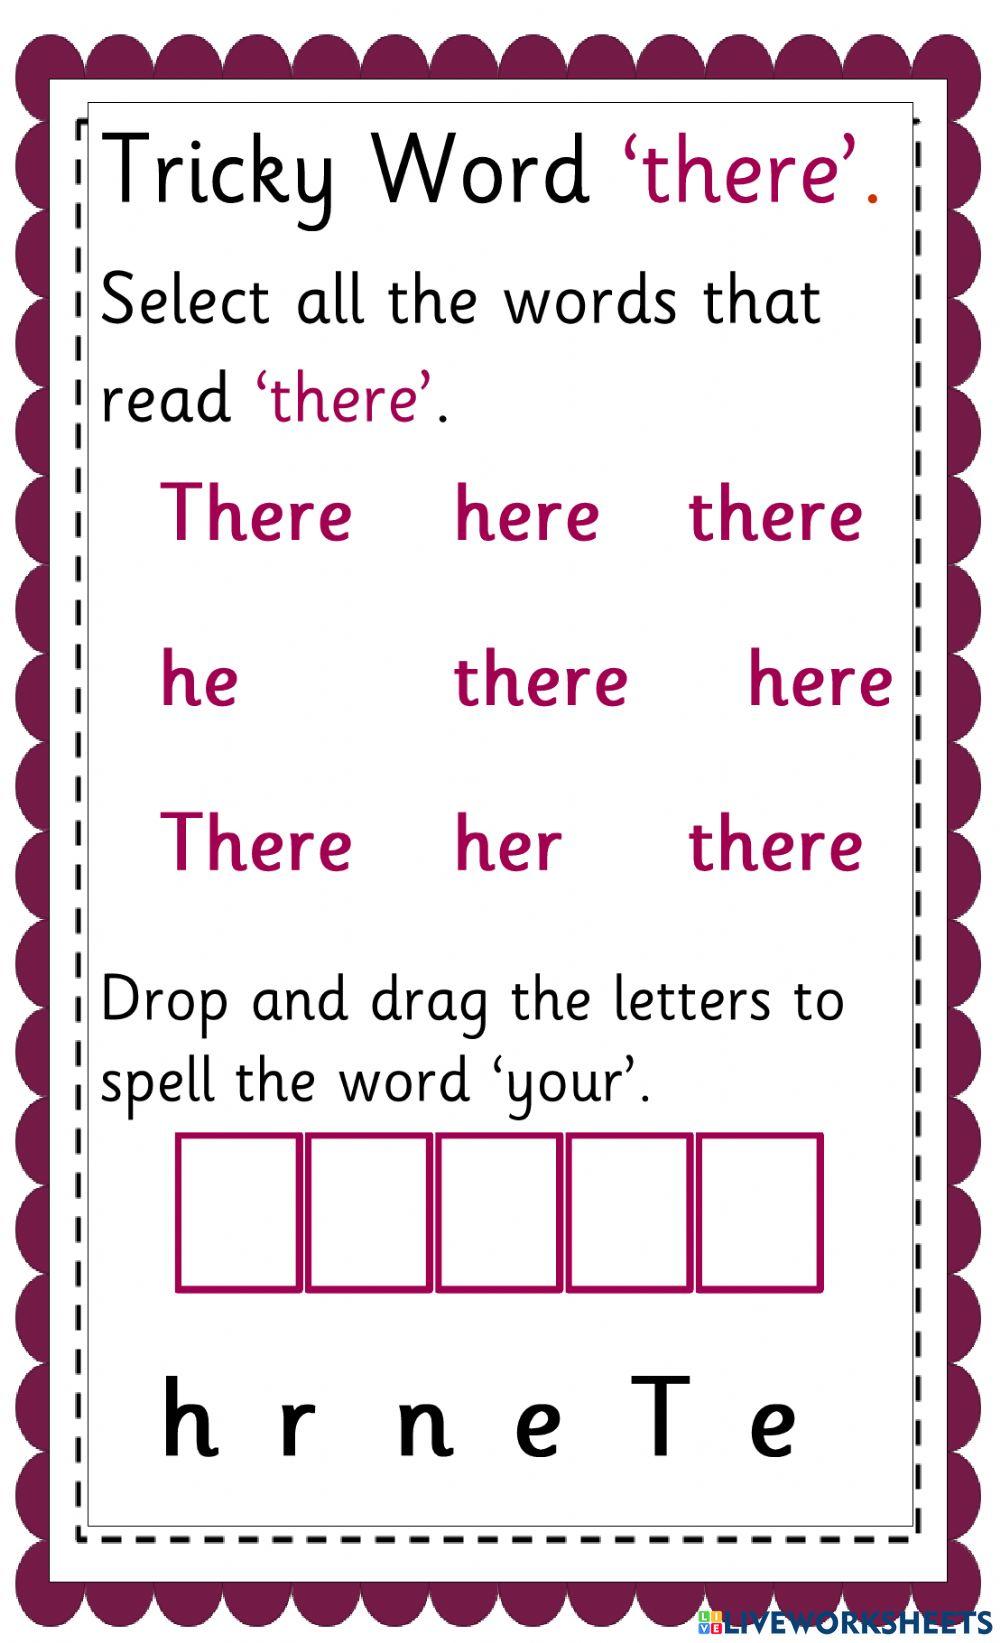 Tricky Word - There